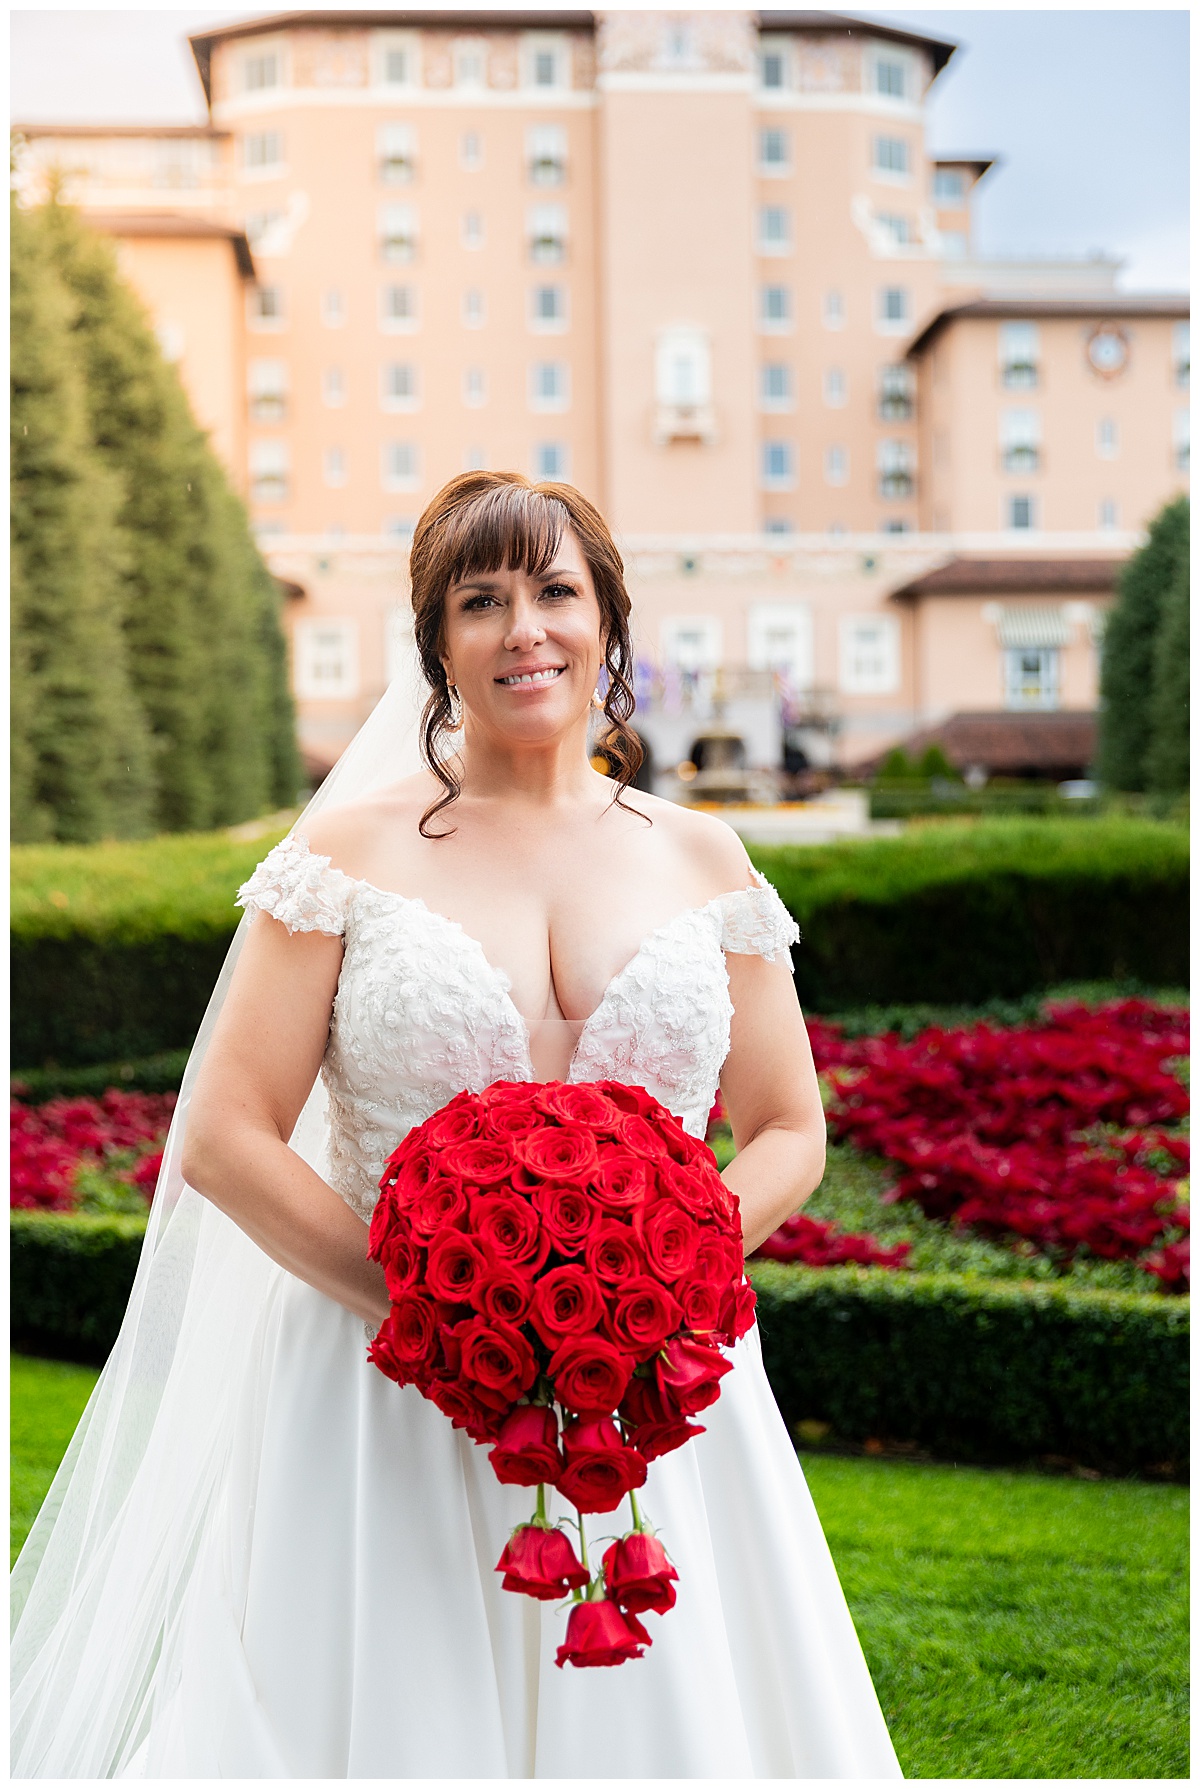 Portraits of a bride during her Broadmoor wedding. She is wearing a lace ballgown and a long veil.